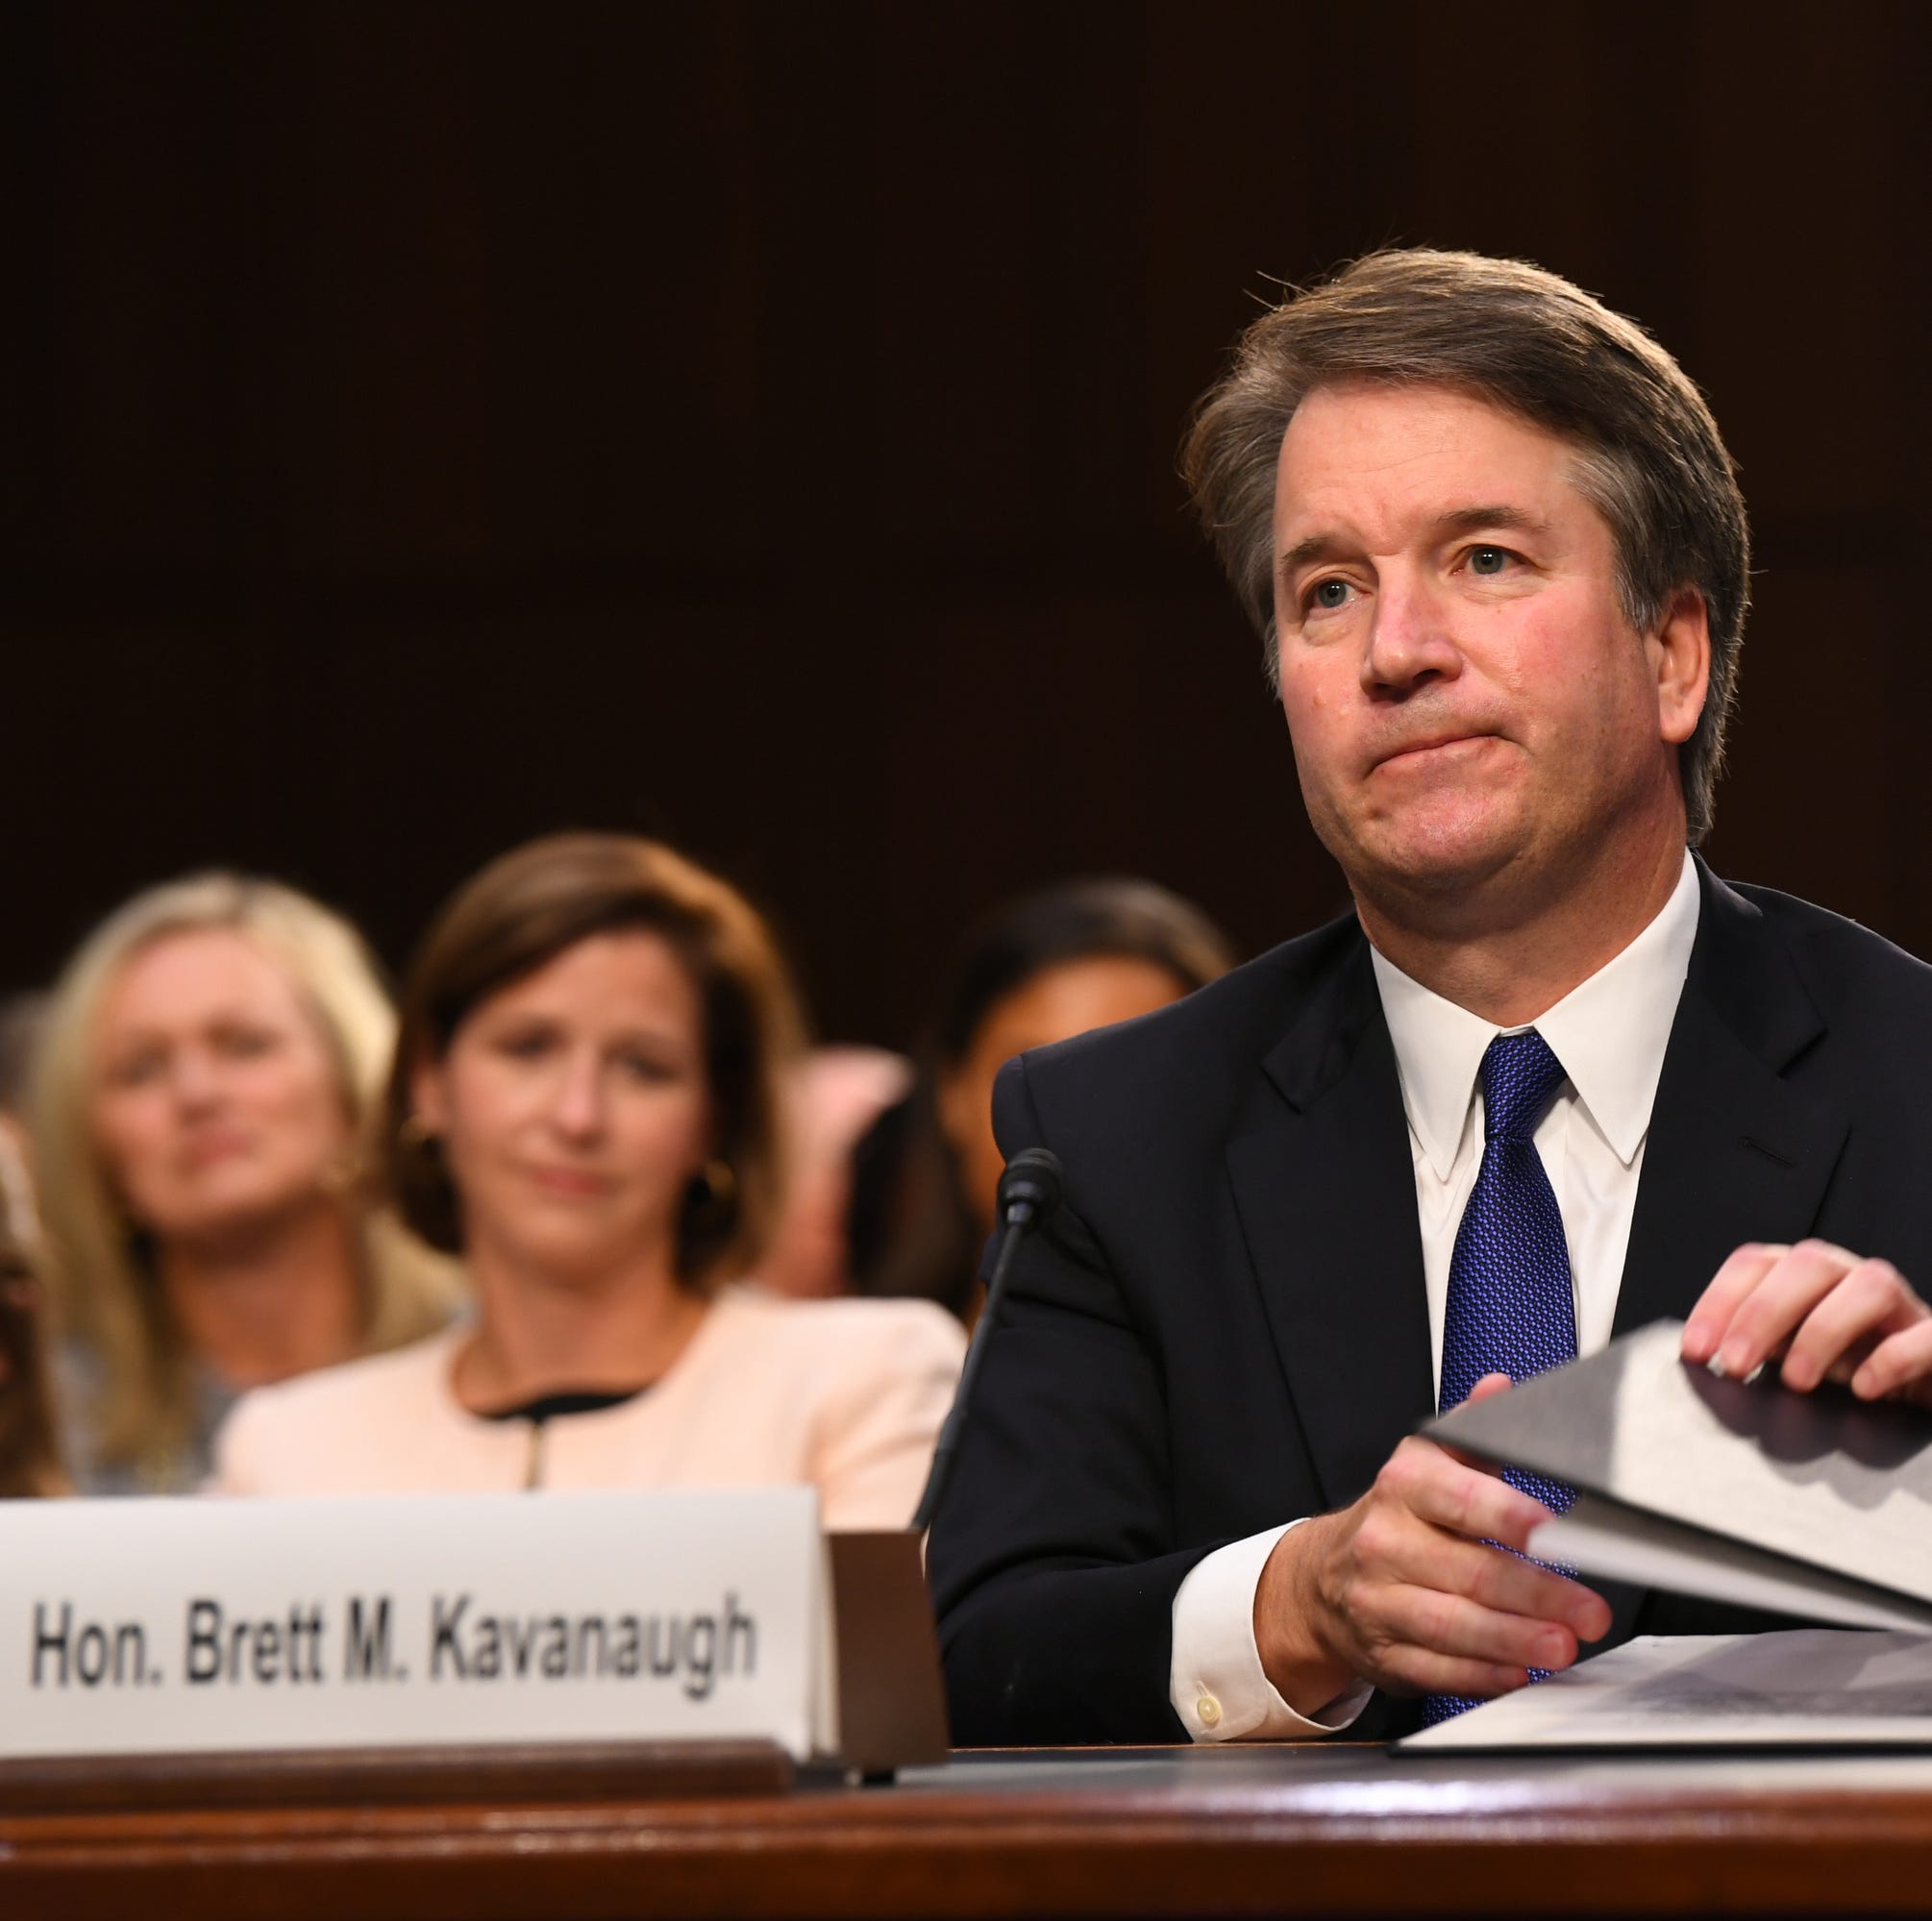 Brett Kavanaugh's nomination to the Supreme Court, now at risk over 36-year-old allegations of sexual misconduct, has risks and rewards for Republicans and Democrats.